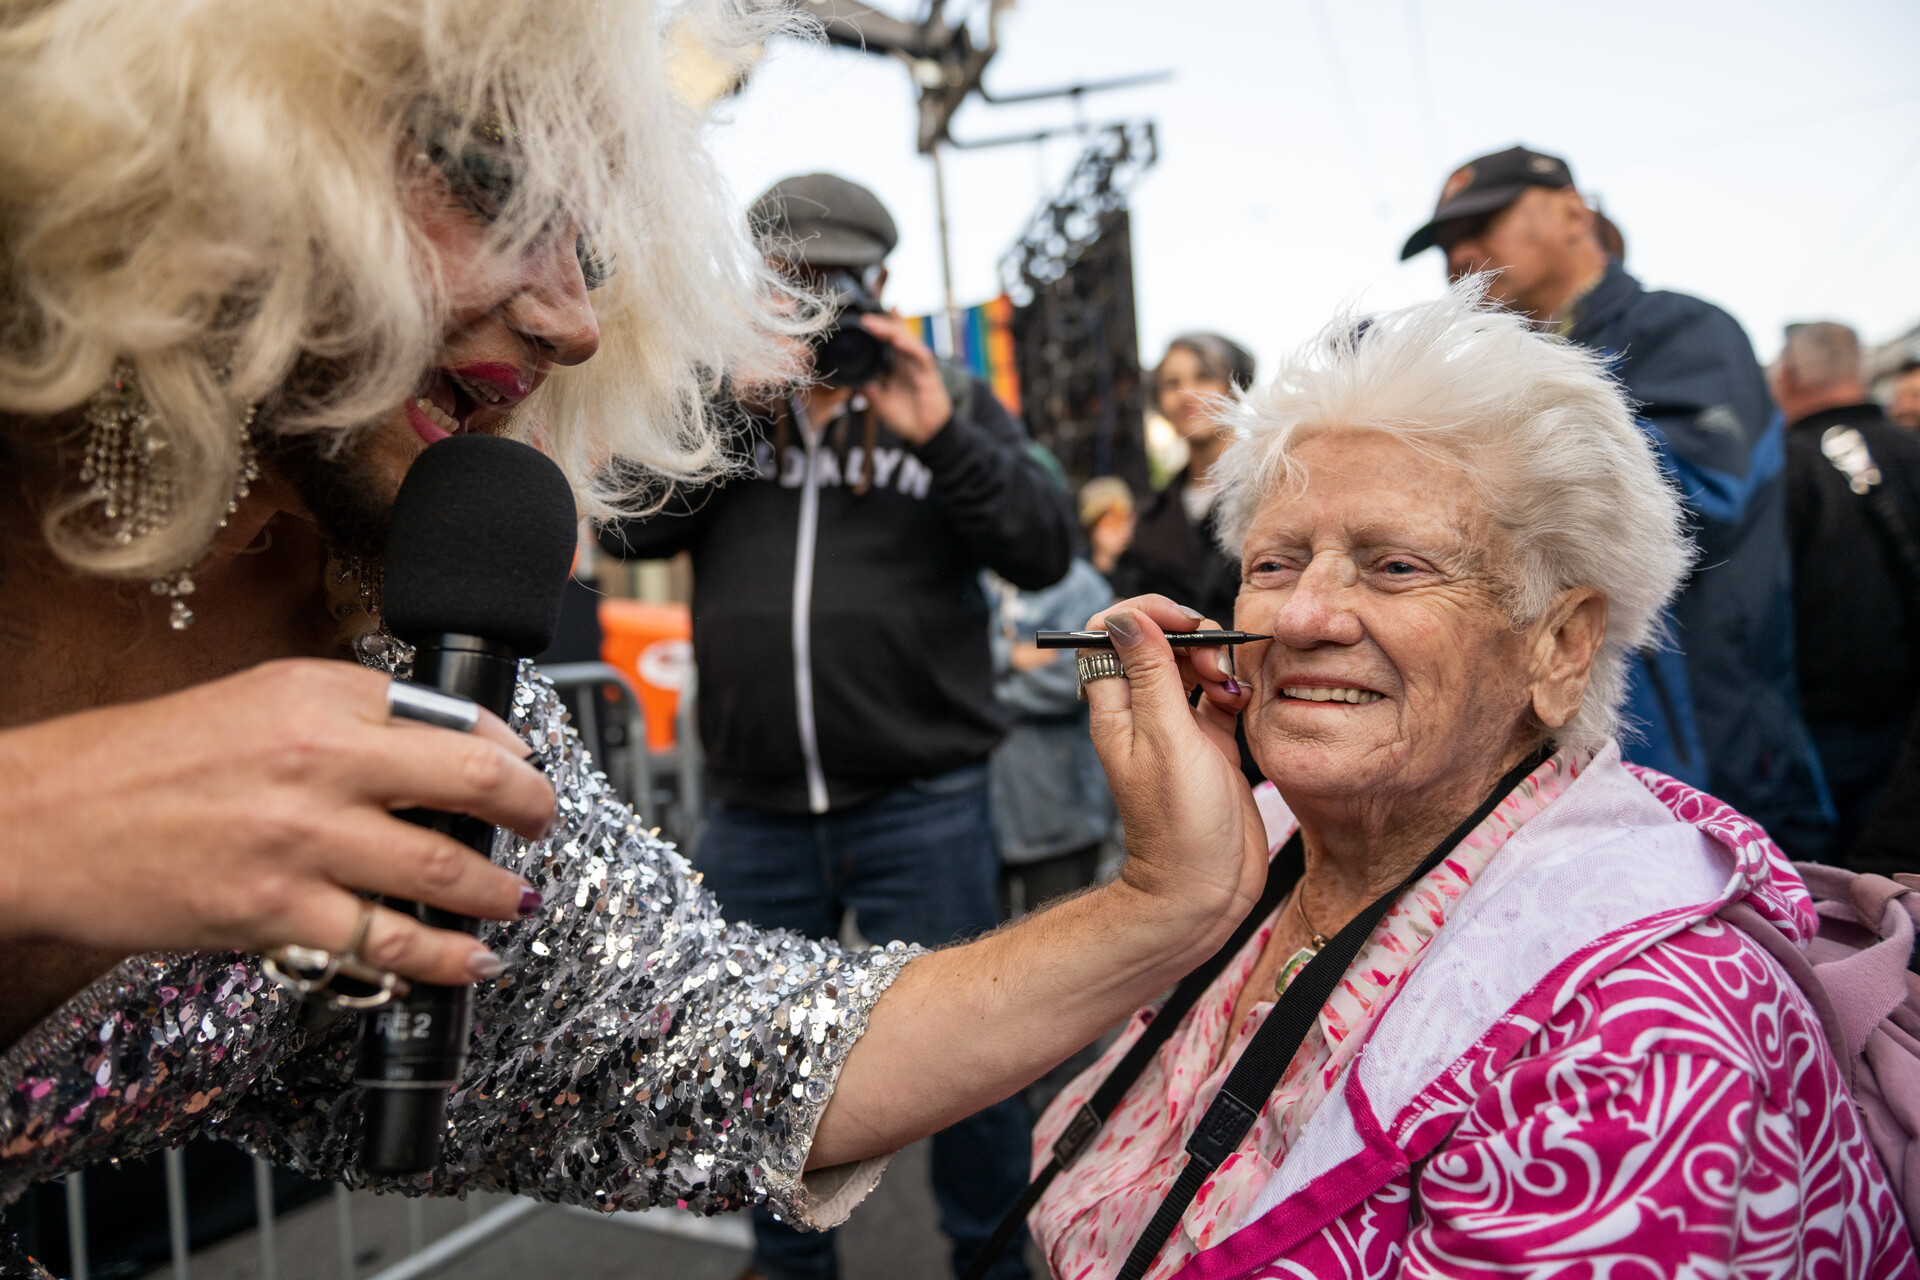 A drag performer holds a microphone in one hand, and with the other, holds a marker and draws a beauty mark on the face of a woman standing in the crowd outside the Castro Theater.